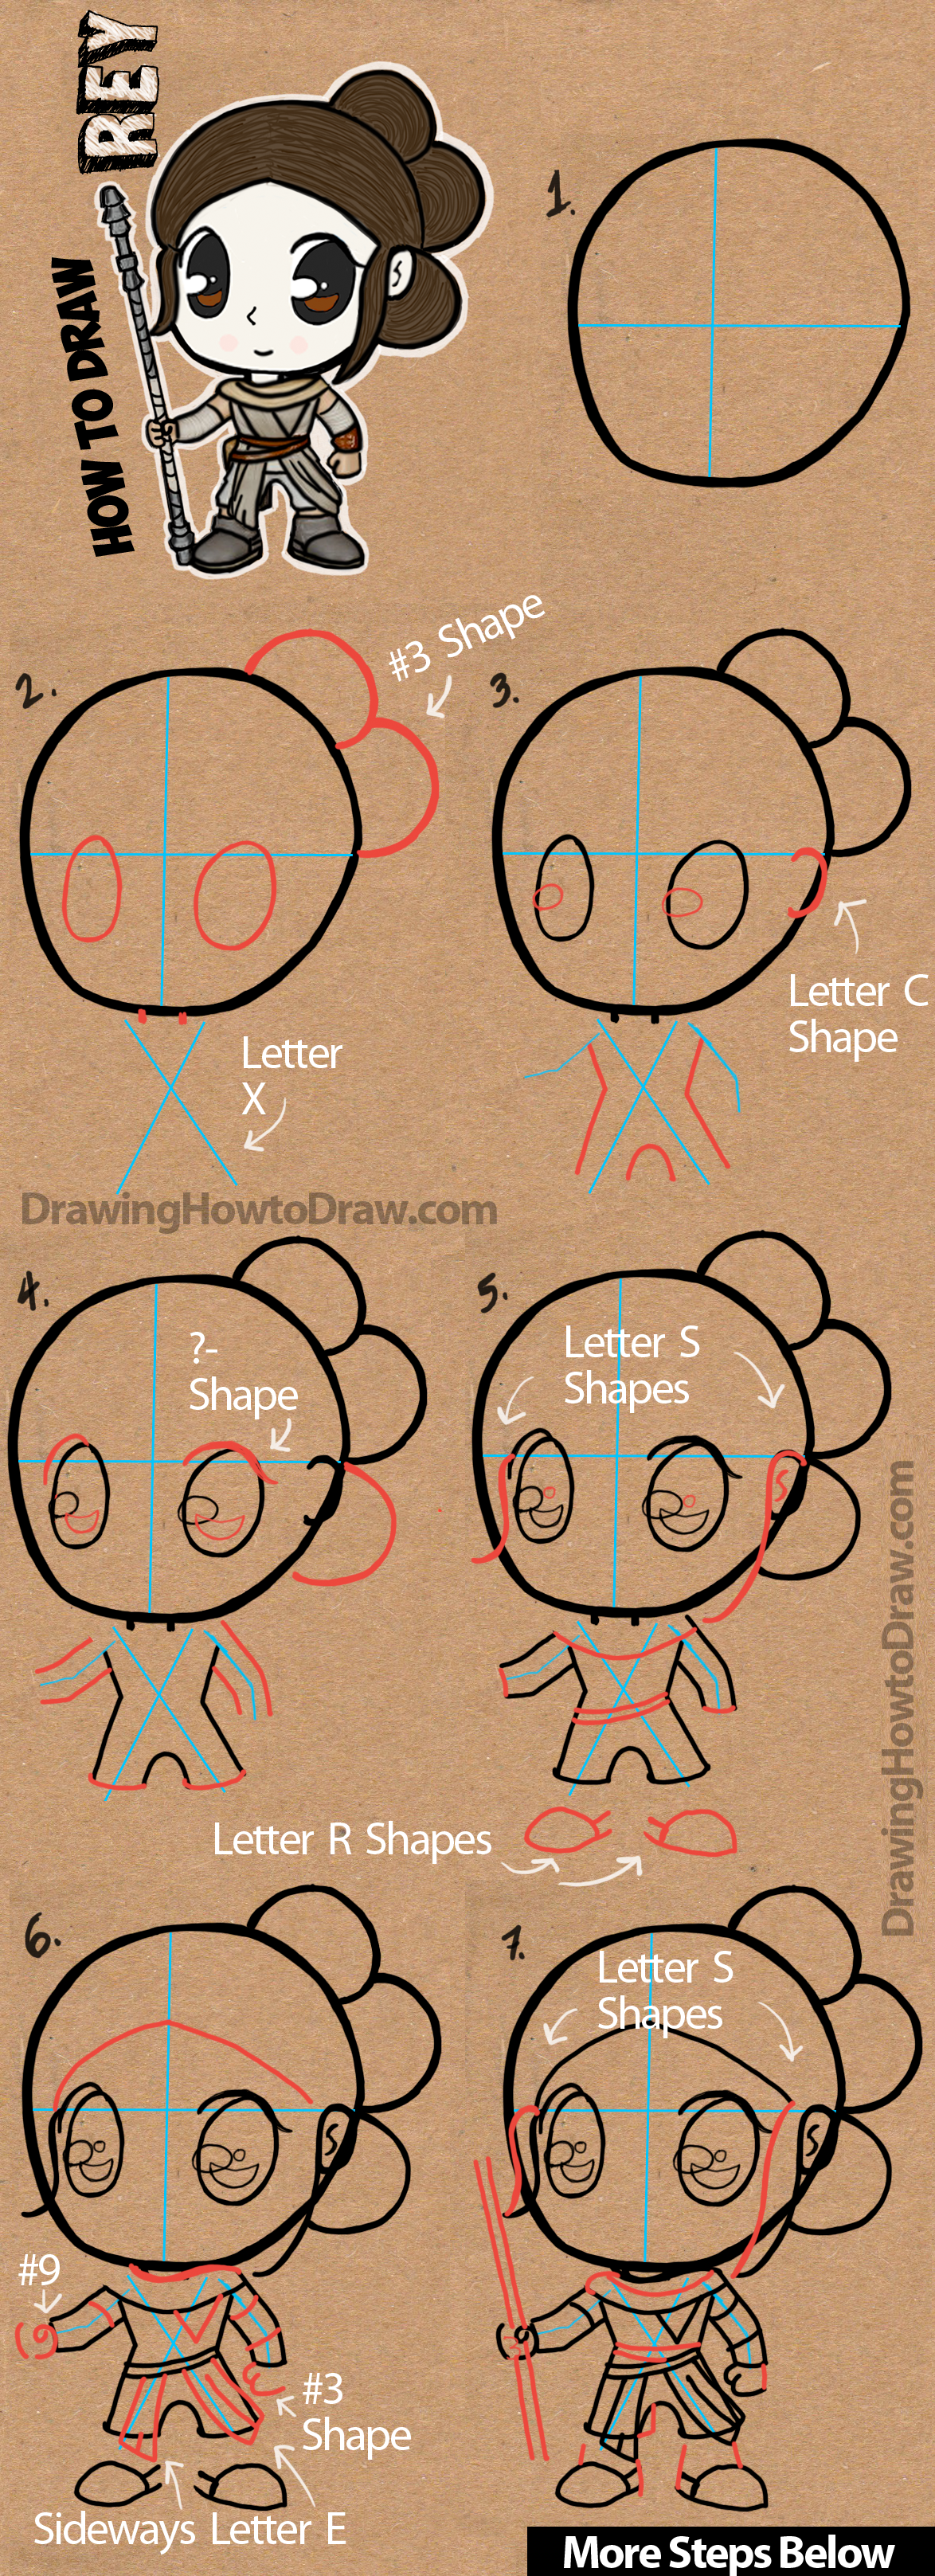 How to Draw Cartoon Chibi Rey from Star Wars The Force Awakens with Easy Step by Step Drawing Lesson